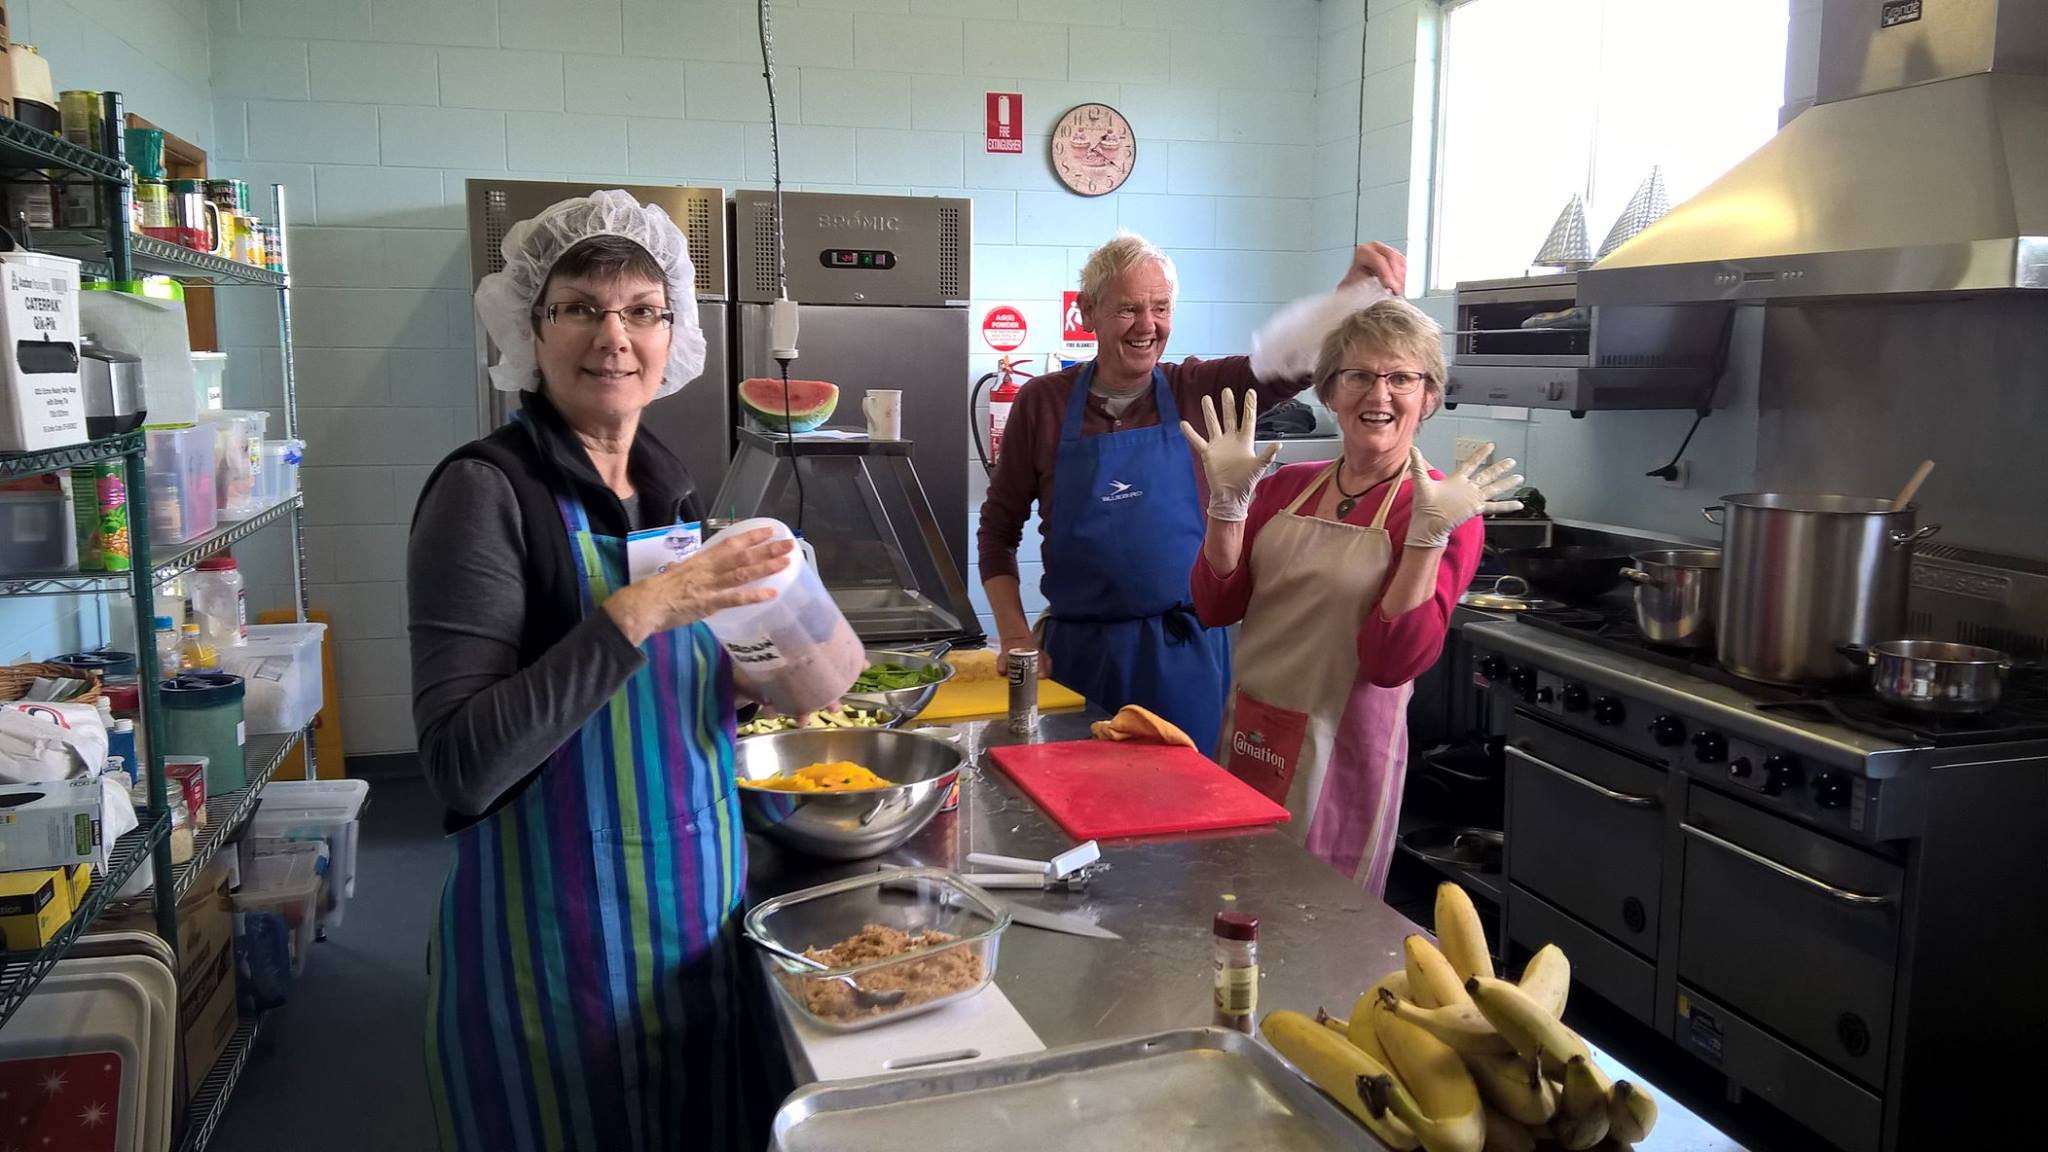 A 'pearl' in Pambula - community kitchen enters its fourth year